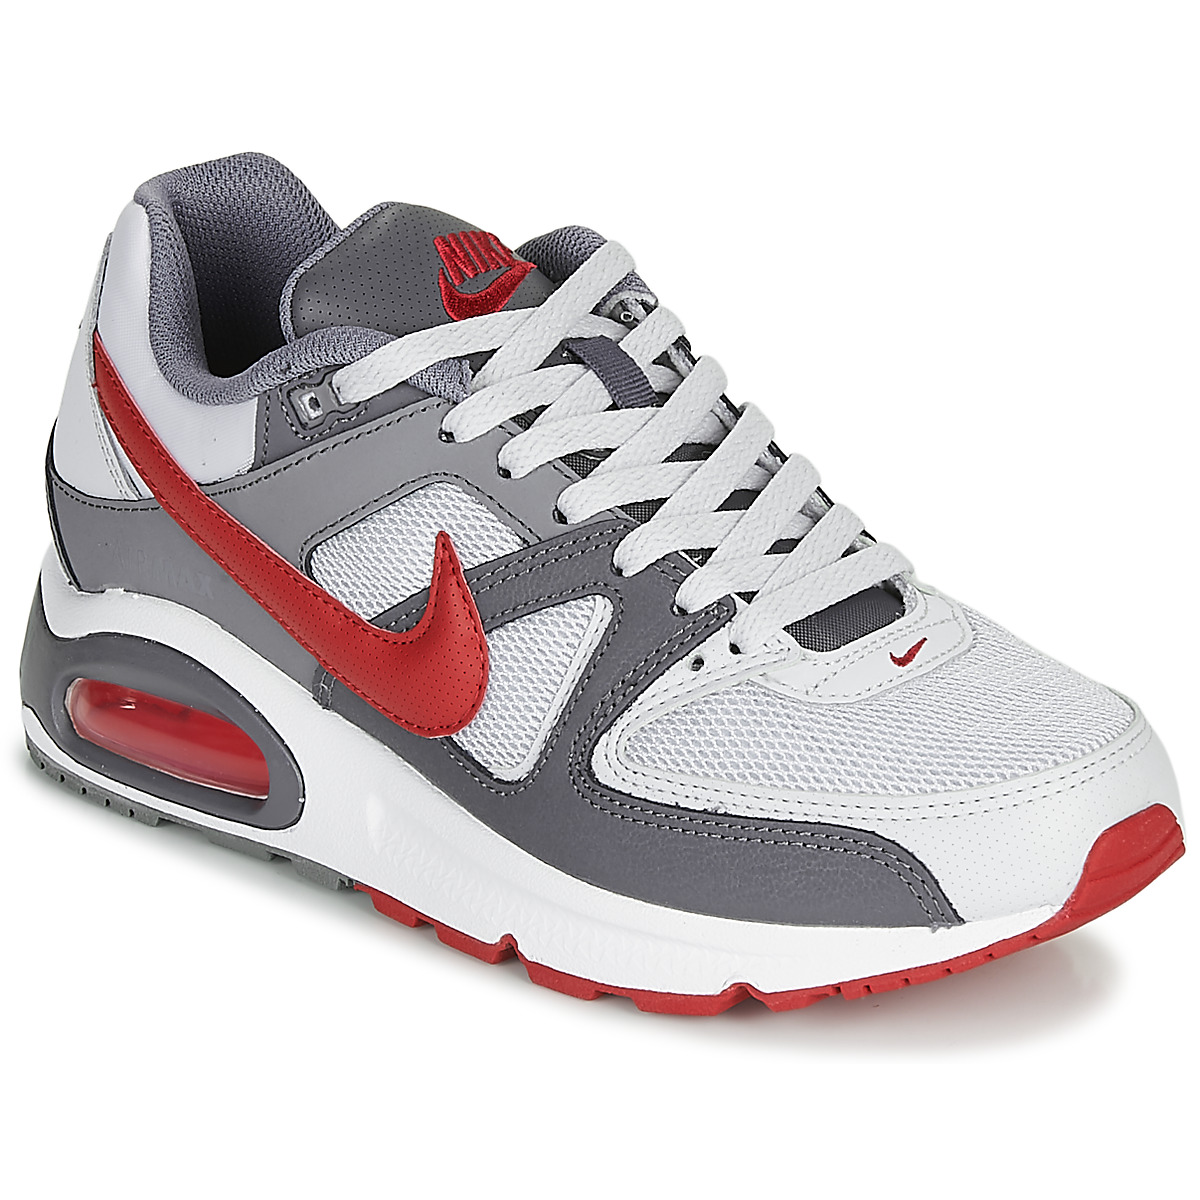 Nike AIR MAX COMMAND Gris / Rouge - Chaussures Baskets basses Homme 153,95 €